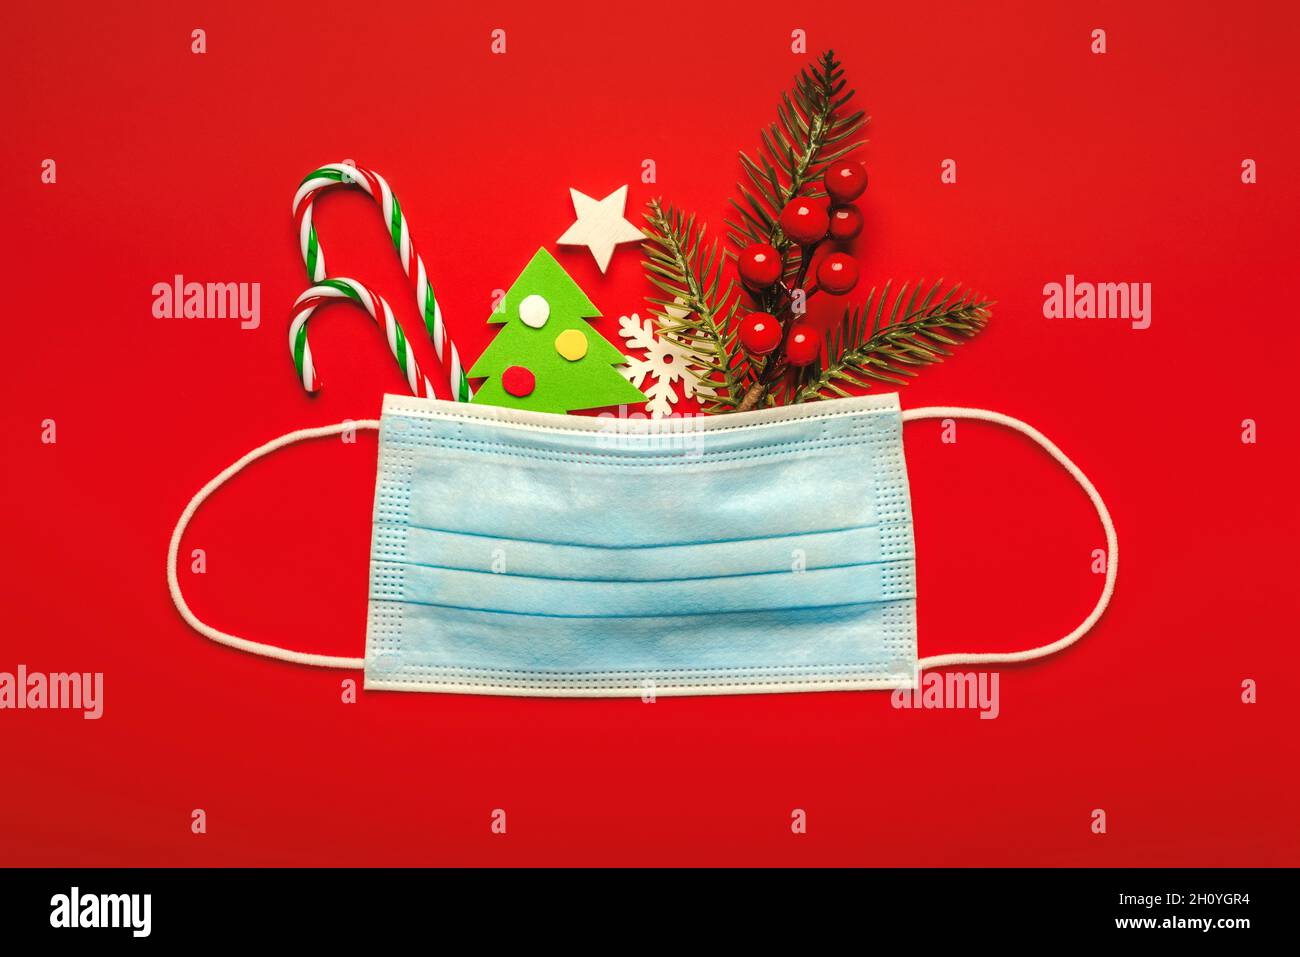 Merry Christmas. Protective surgical mask with christmas decorations over red background.Christmas concept background Stock Photo